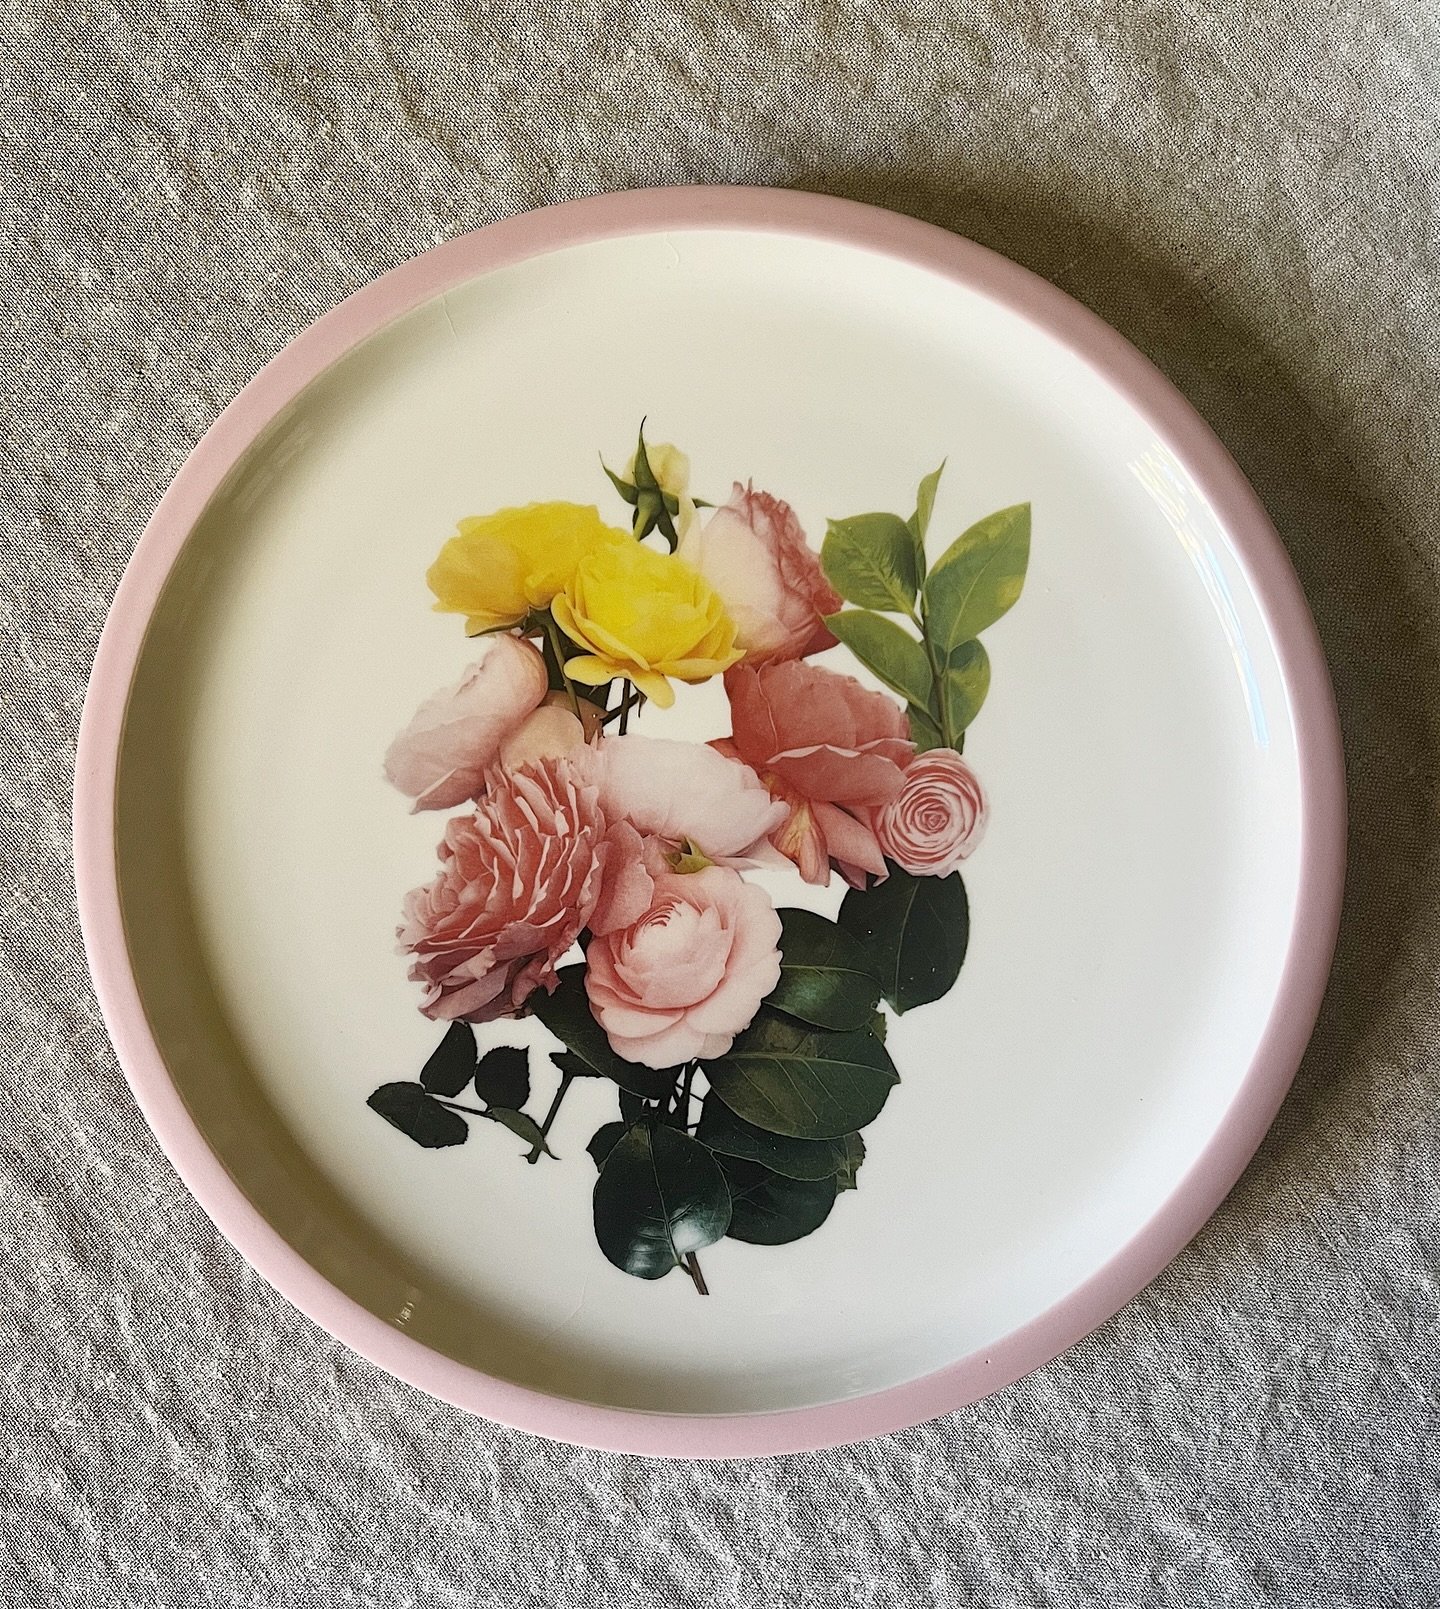 KTH Kitchen Ceramics 

𝒮𝒾𝓂𝓅𝓁𝑒 𝒮𝓊𝓃𝒹𝒶𝓎𝓈
A new vintage plate featuring some of my garden blooms from last year. Seemed appropriate to post today with all the beautiful flowers coming into bloom right now. Nice to look back on this bunch. Th